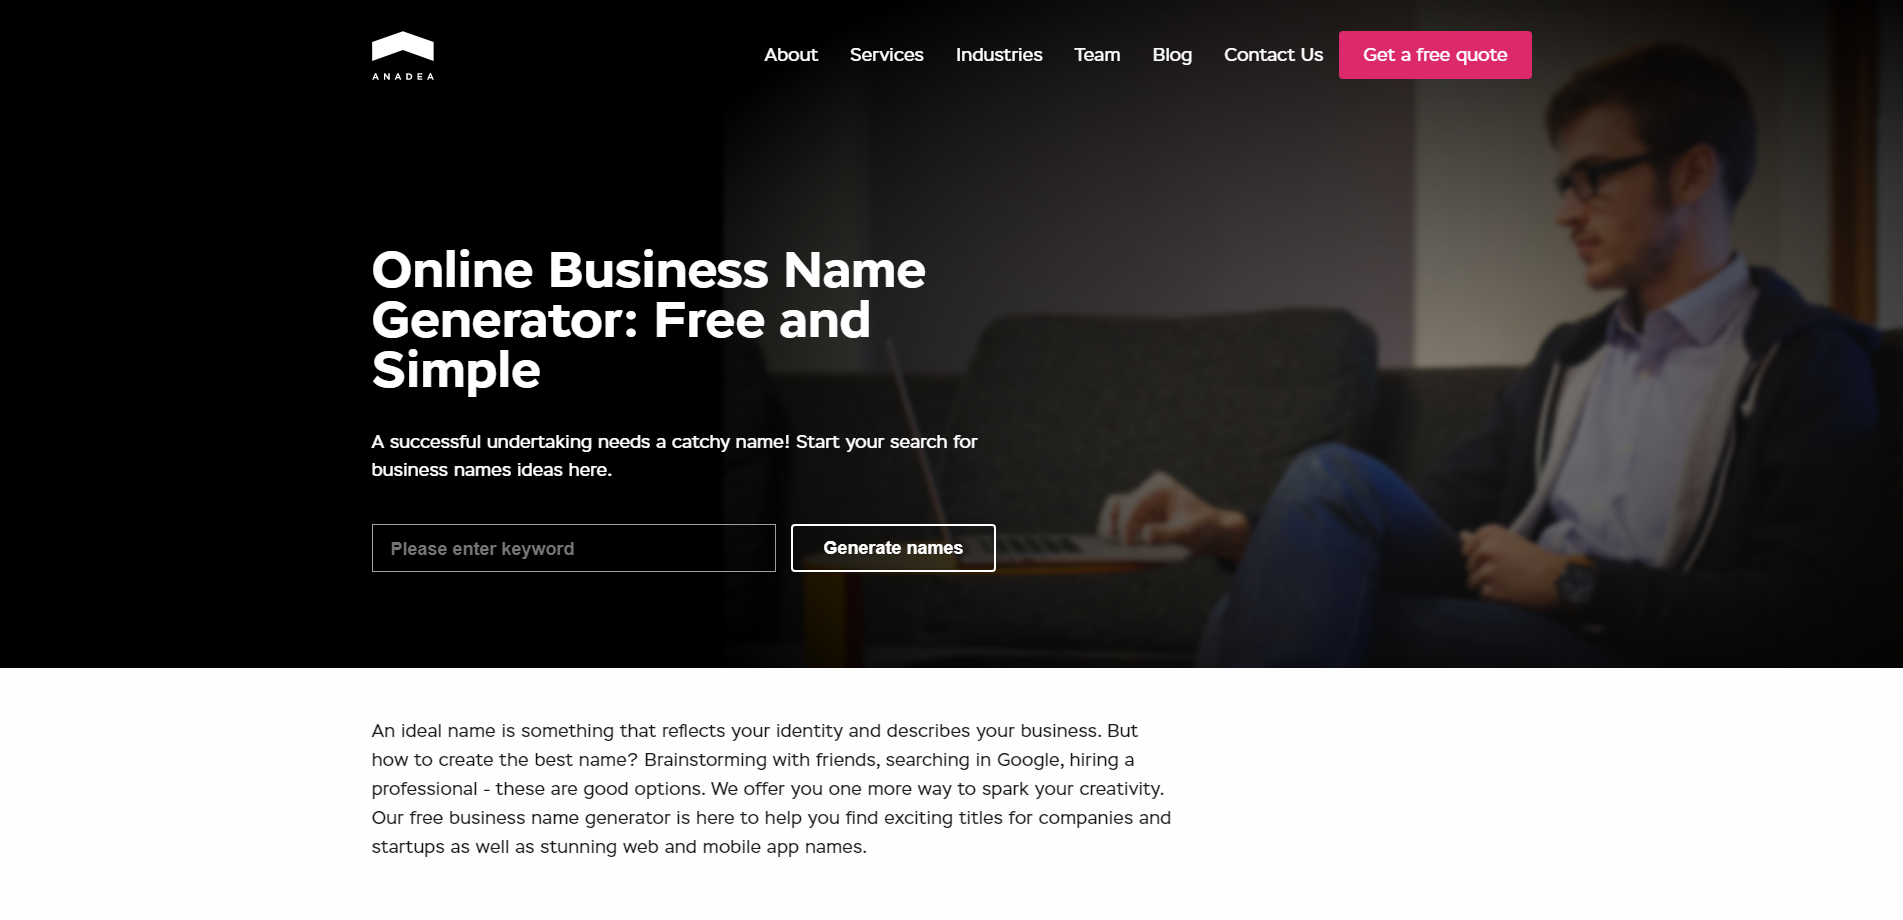 Best Free Business Name Generator Tools to Find Brand ...